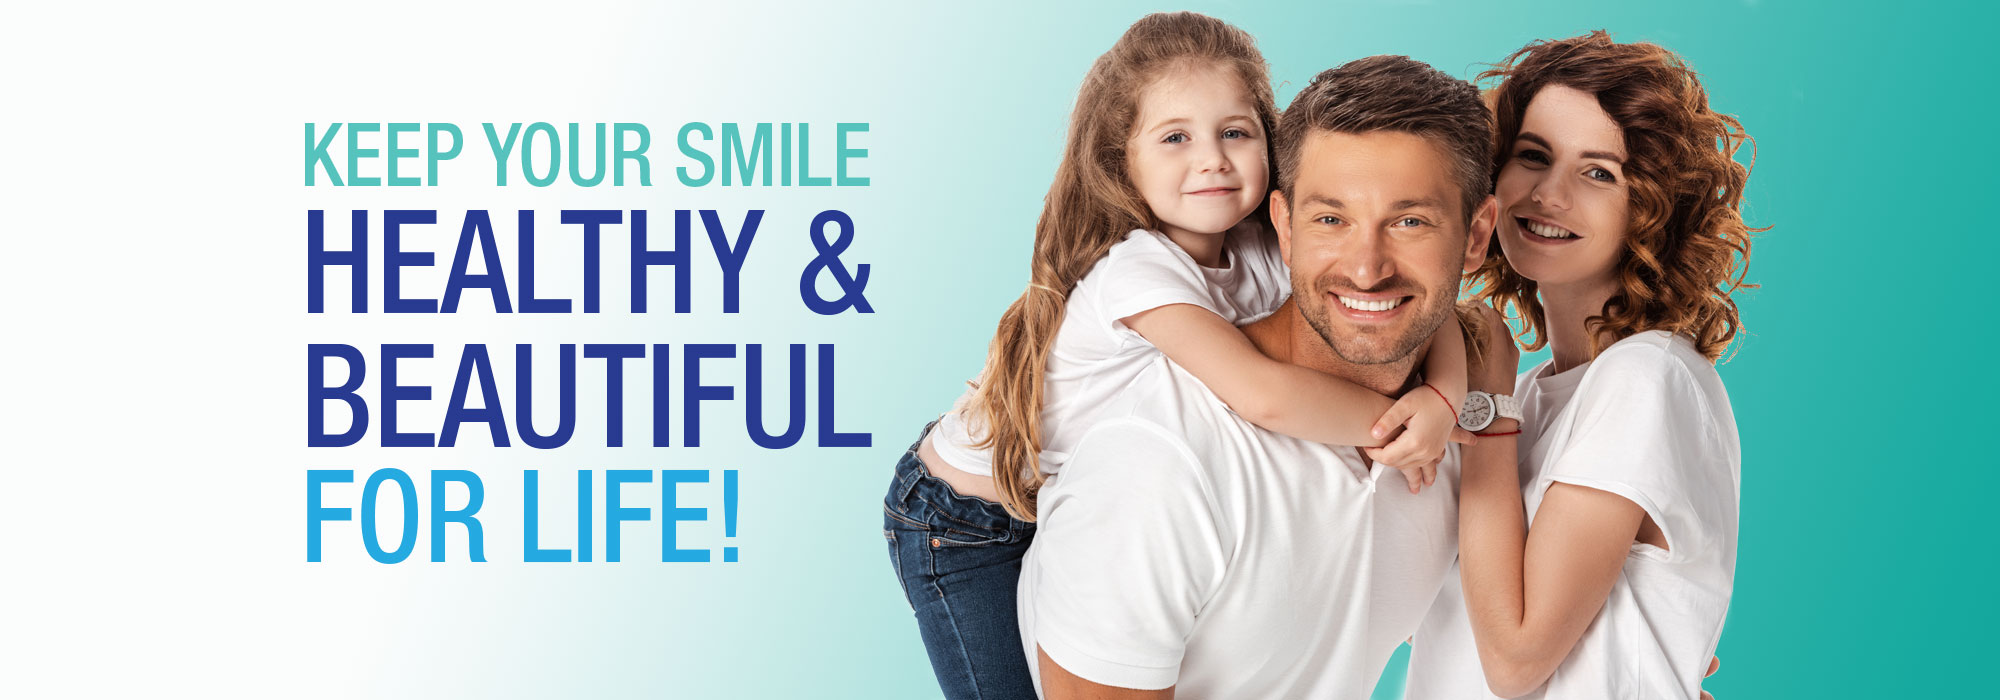 Restore Your Teeth with Dental Fillings